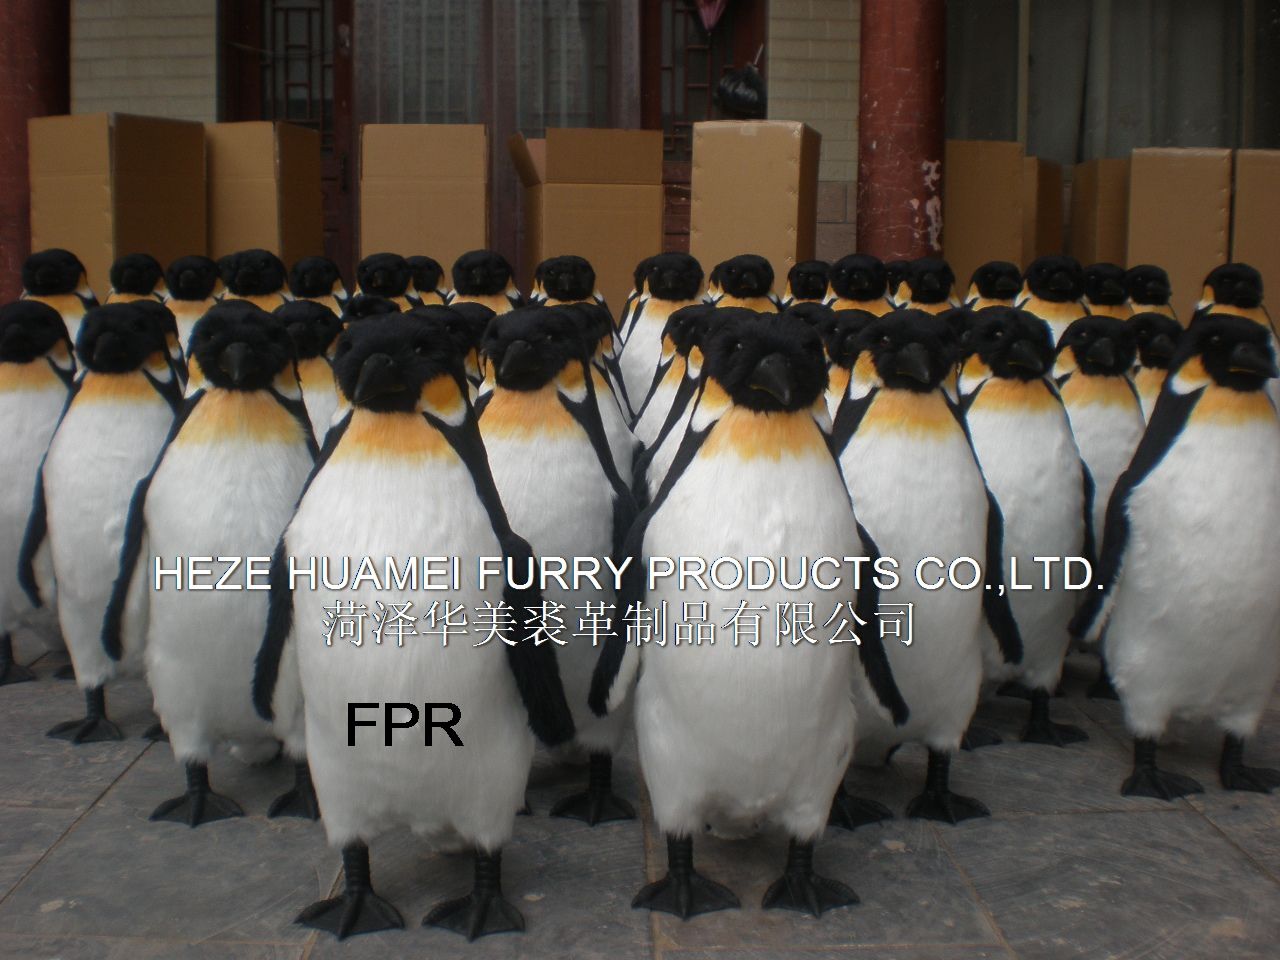 FPR,HEZE YUHANG FURRY PRODUCTS CO., LTD.